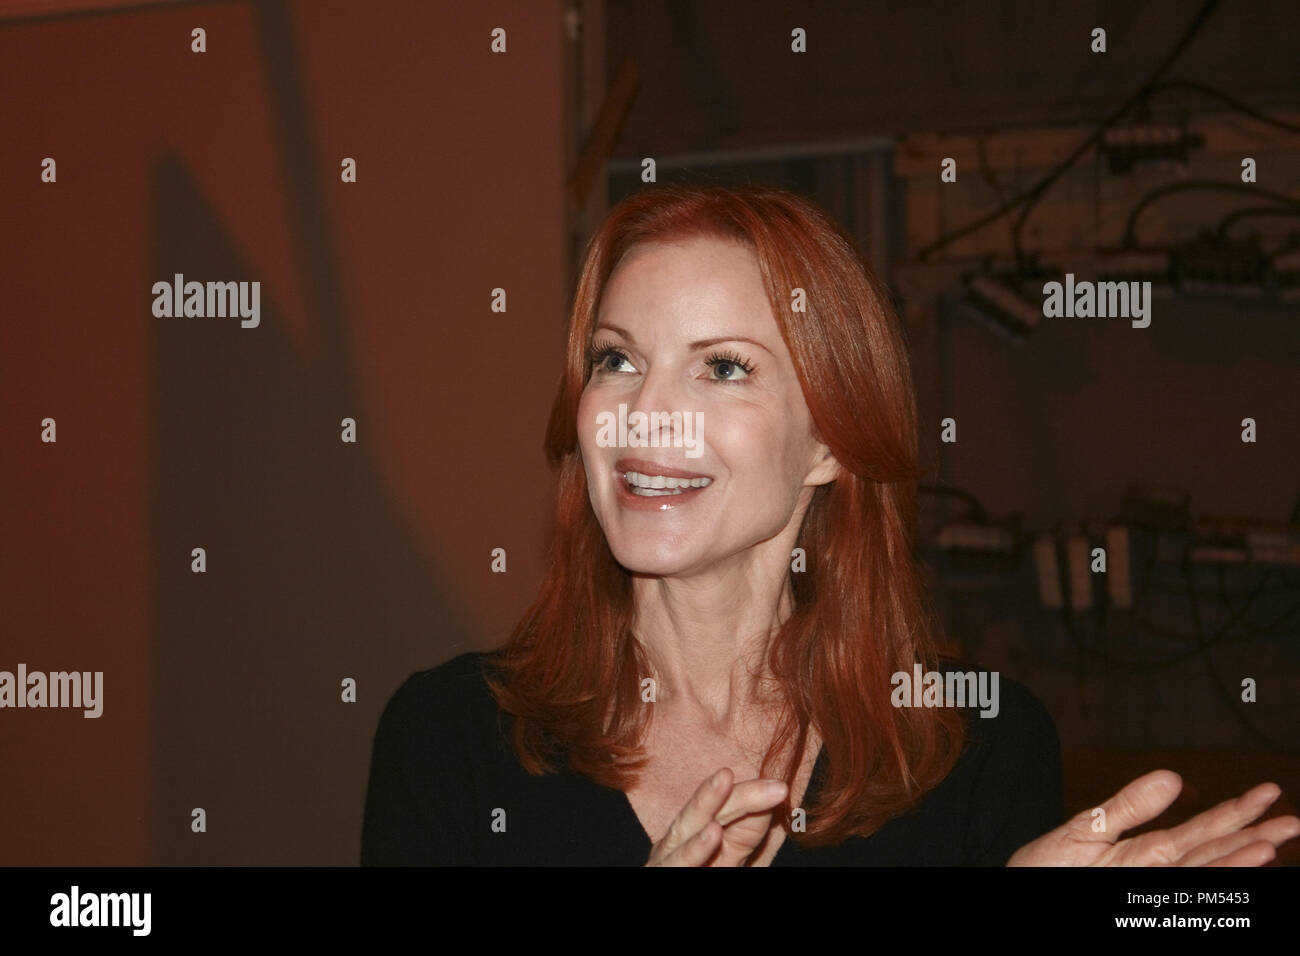 Marcia Cross 'Desperate Housewives'  Portrait Session, July 27, 2010.  Reproduction by American tabloids is absolutely forbidden. File Reference # 30383 014JRC  For Editorial Use Only -  All Rights Reserved Stock Photo